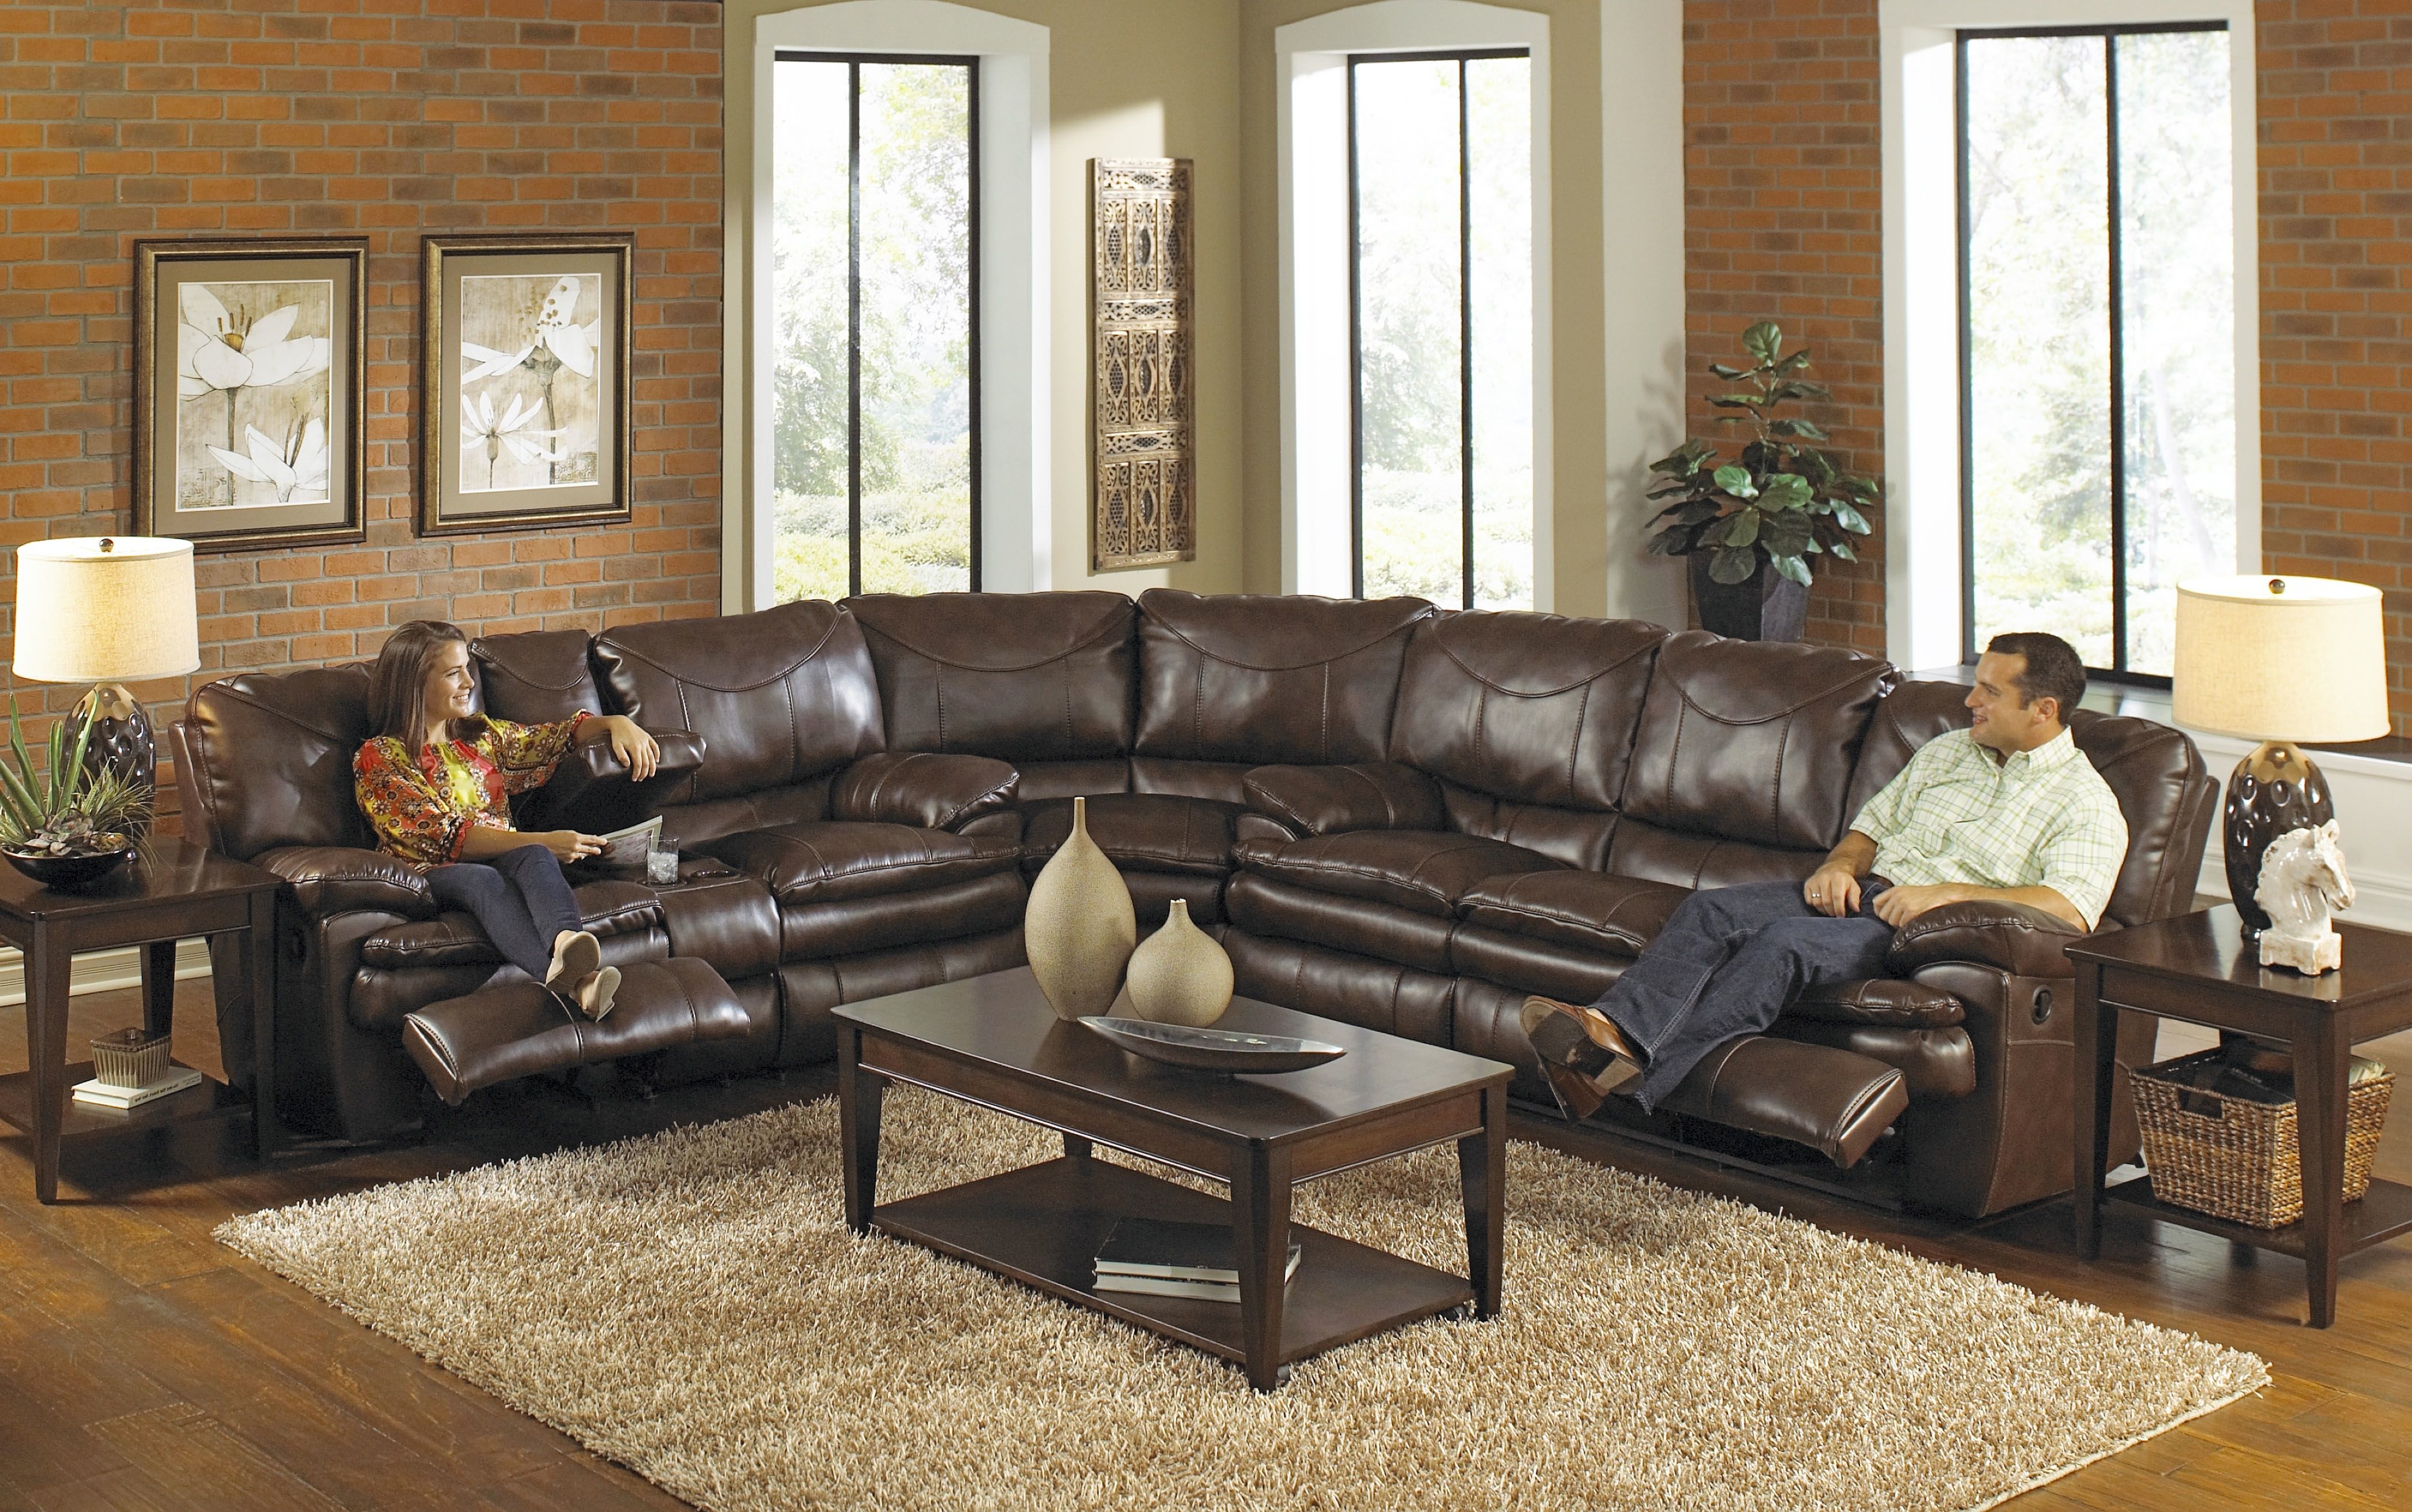 Sectional Sofas With Recliners Leather Throughout Well Liked Delivered Sofa With Chaise And Recliner Buy Large Sectional Sofas (View 3 of 20)